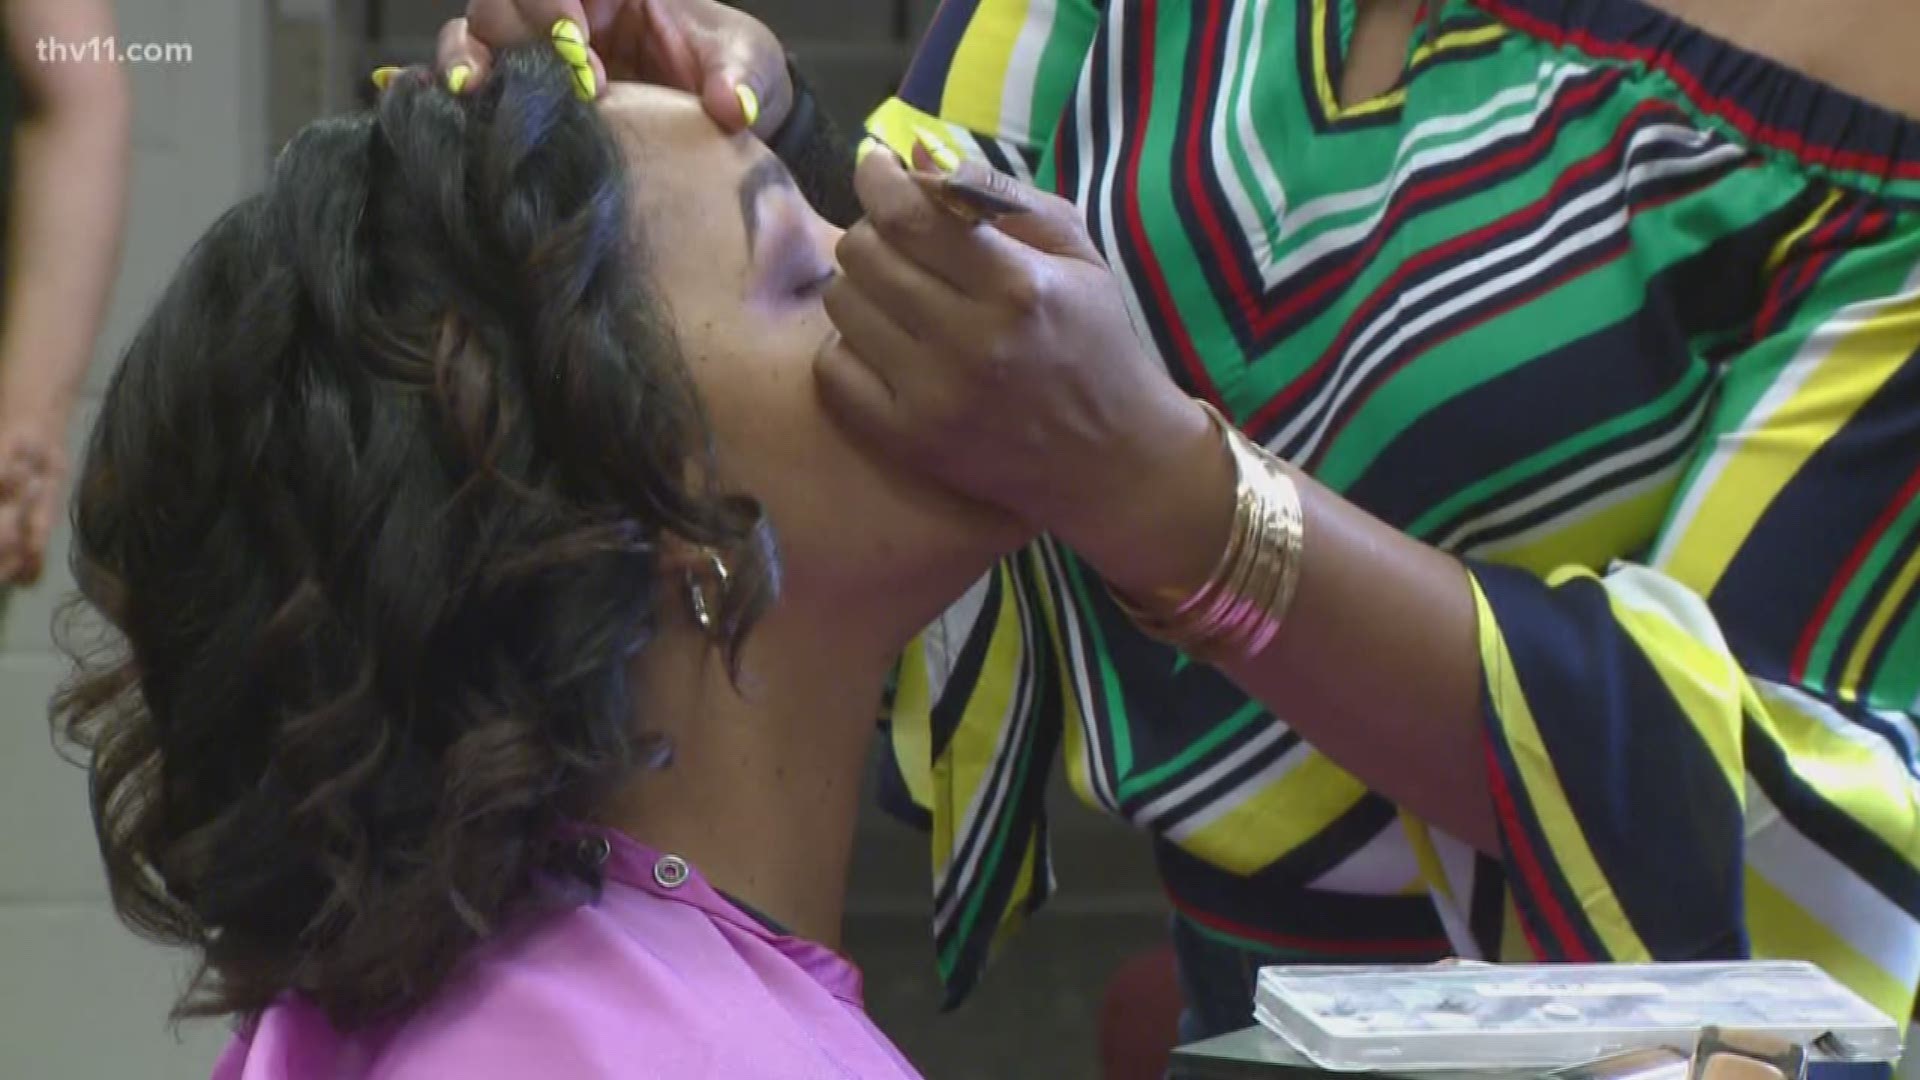 Twenty moms joined for "Supermoms pampering party," a spa-treatment for moms whose children have special needs.